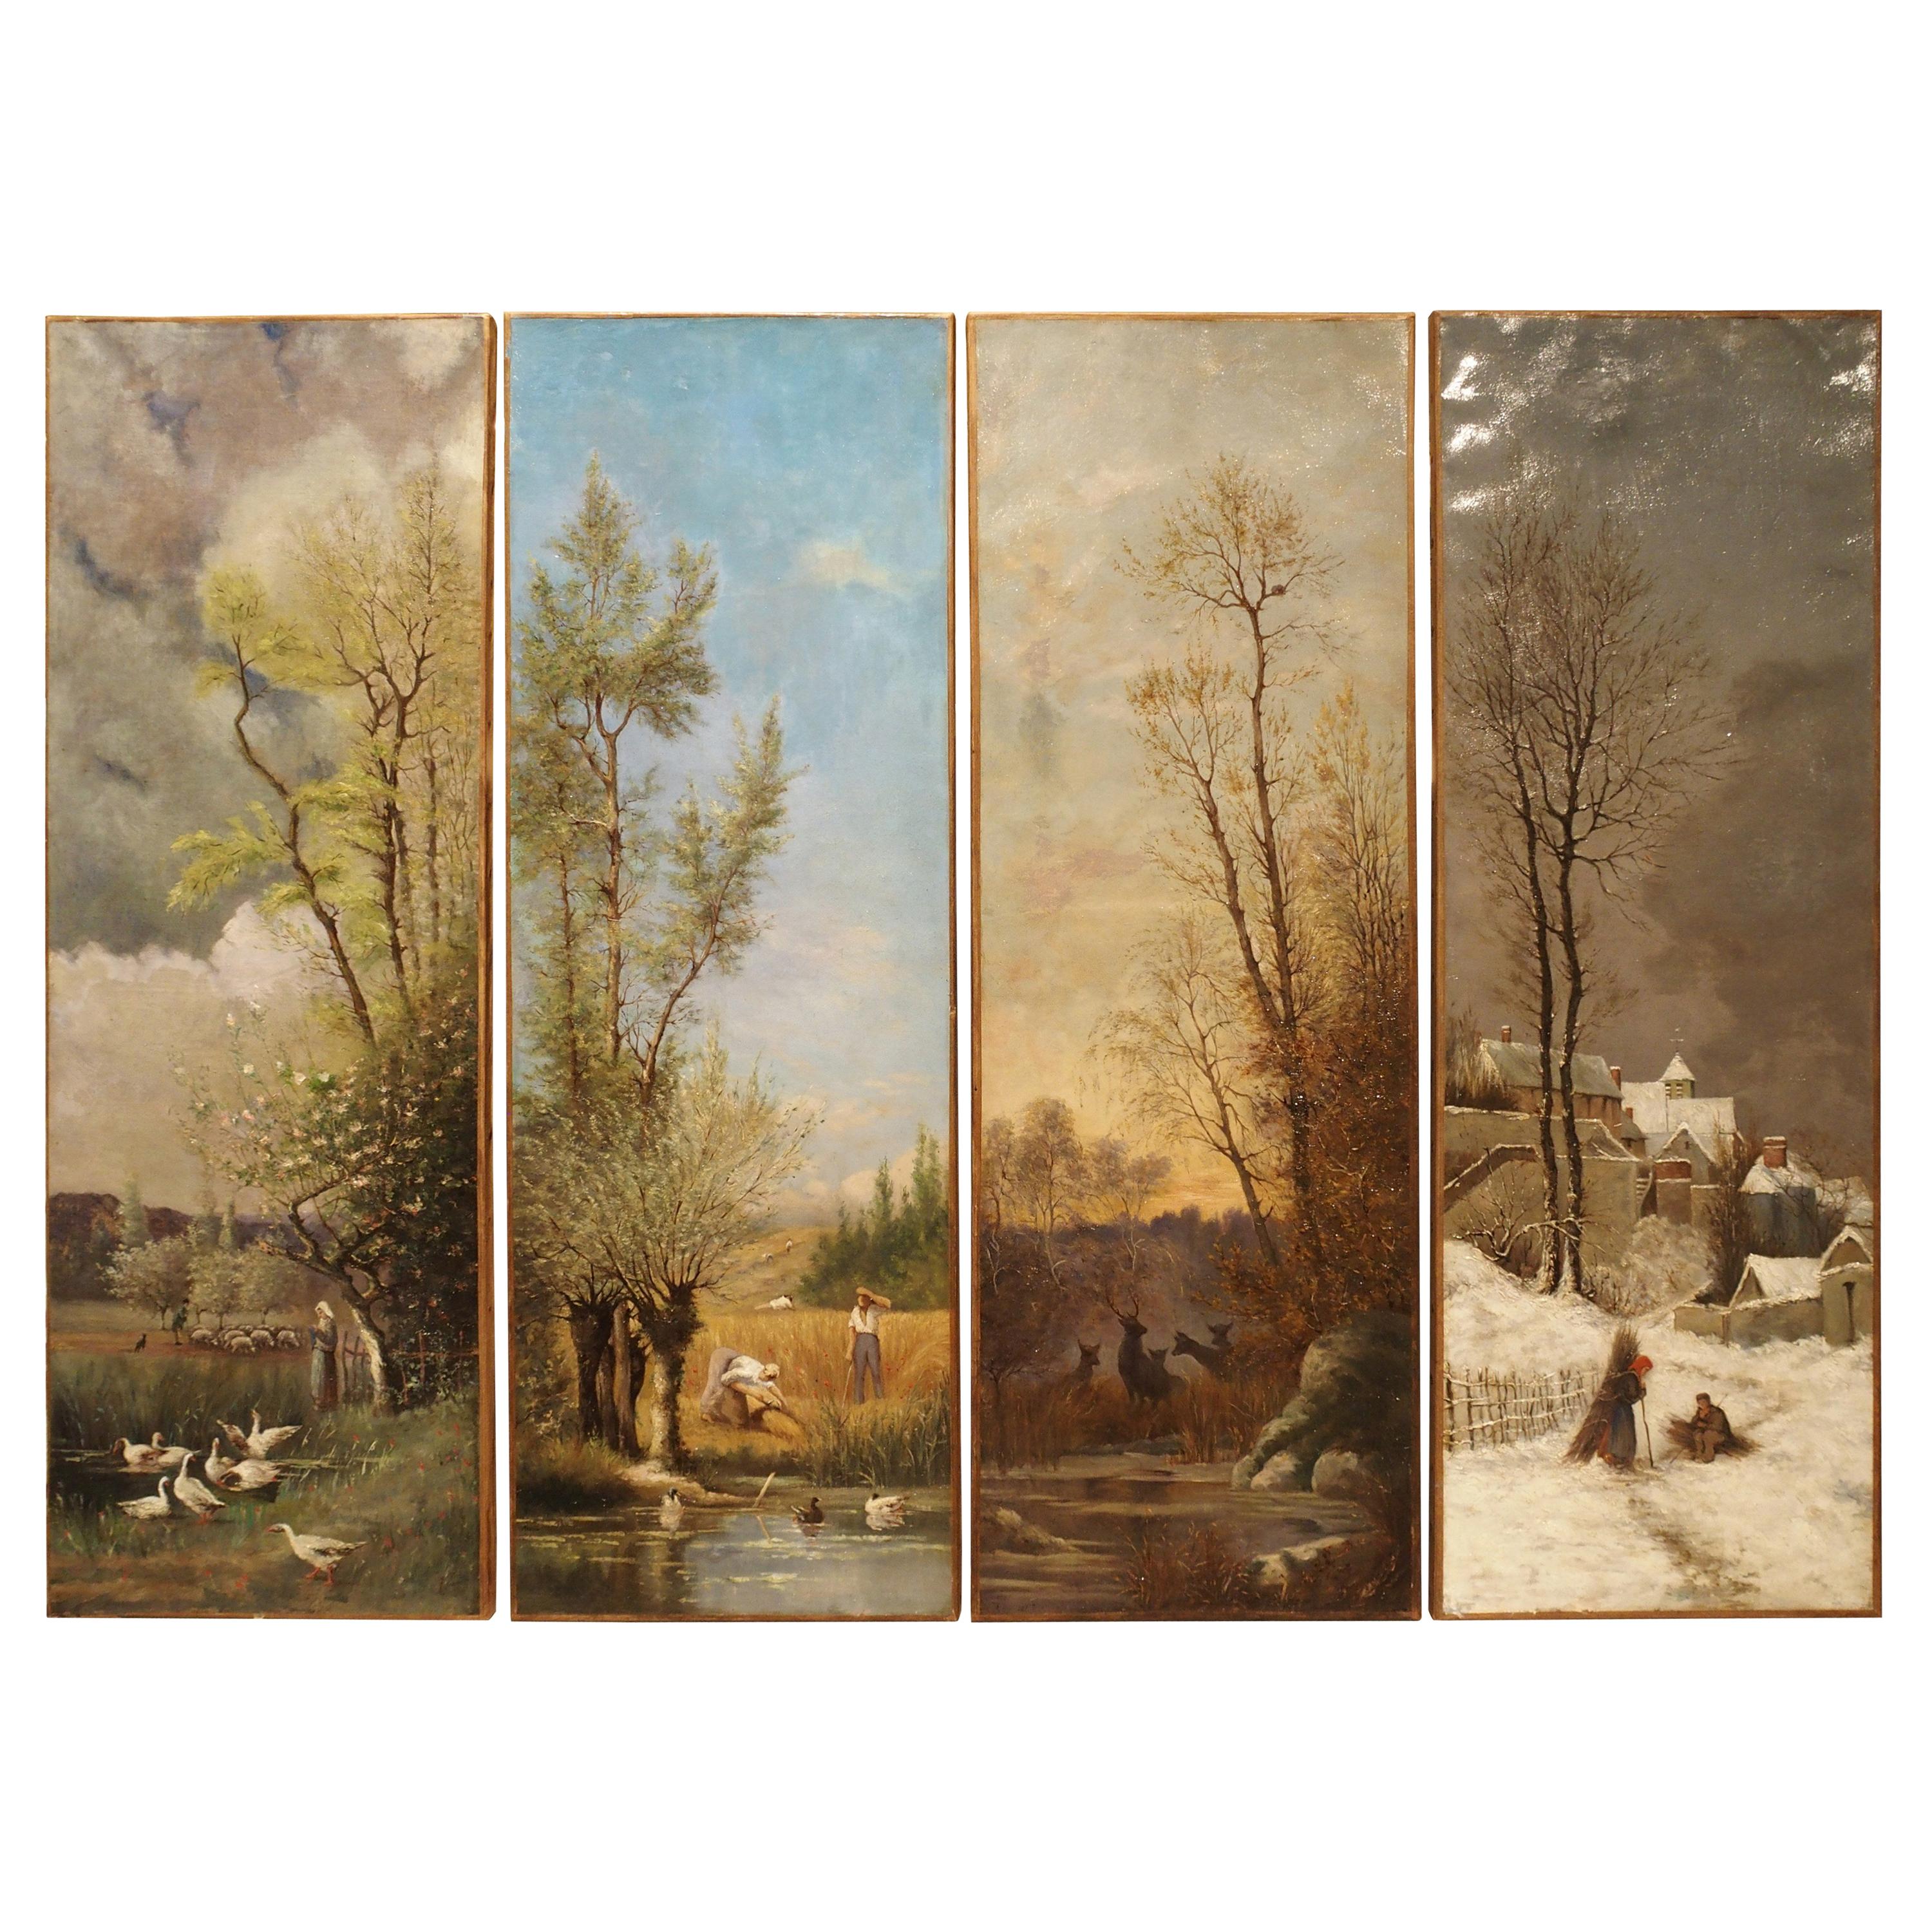 Antique French Quadriptych of the Four Seasons, Oil on Canvas, 19th Century